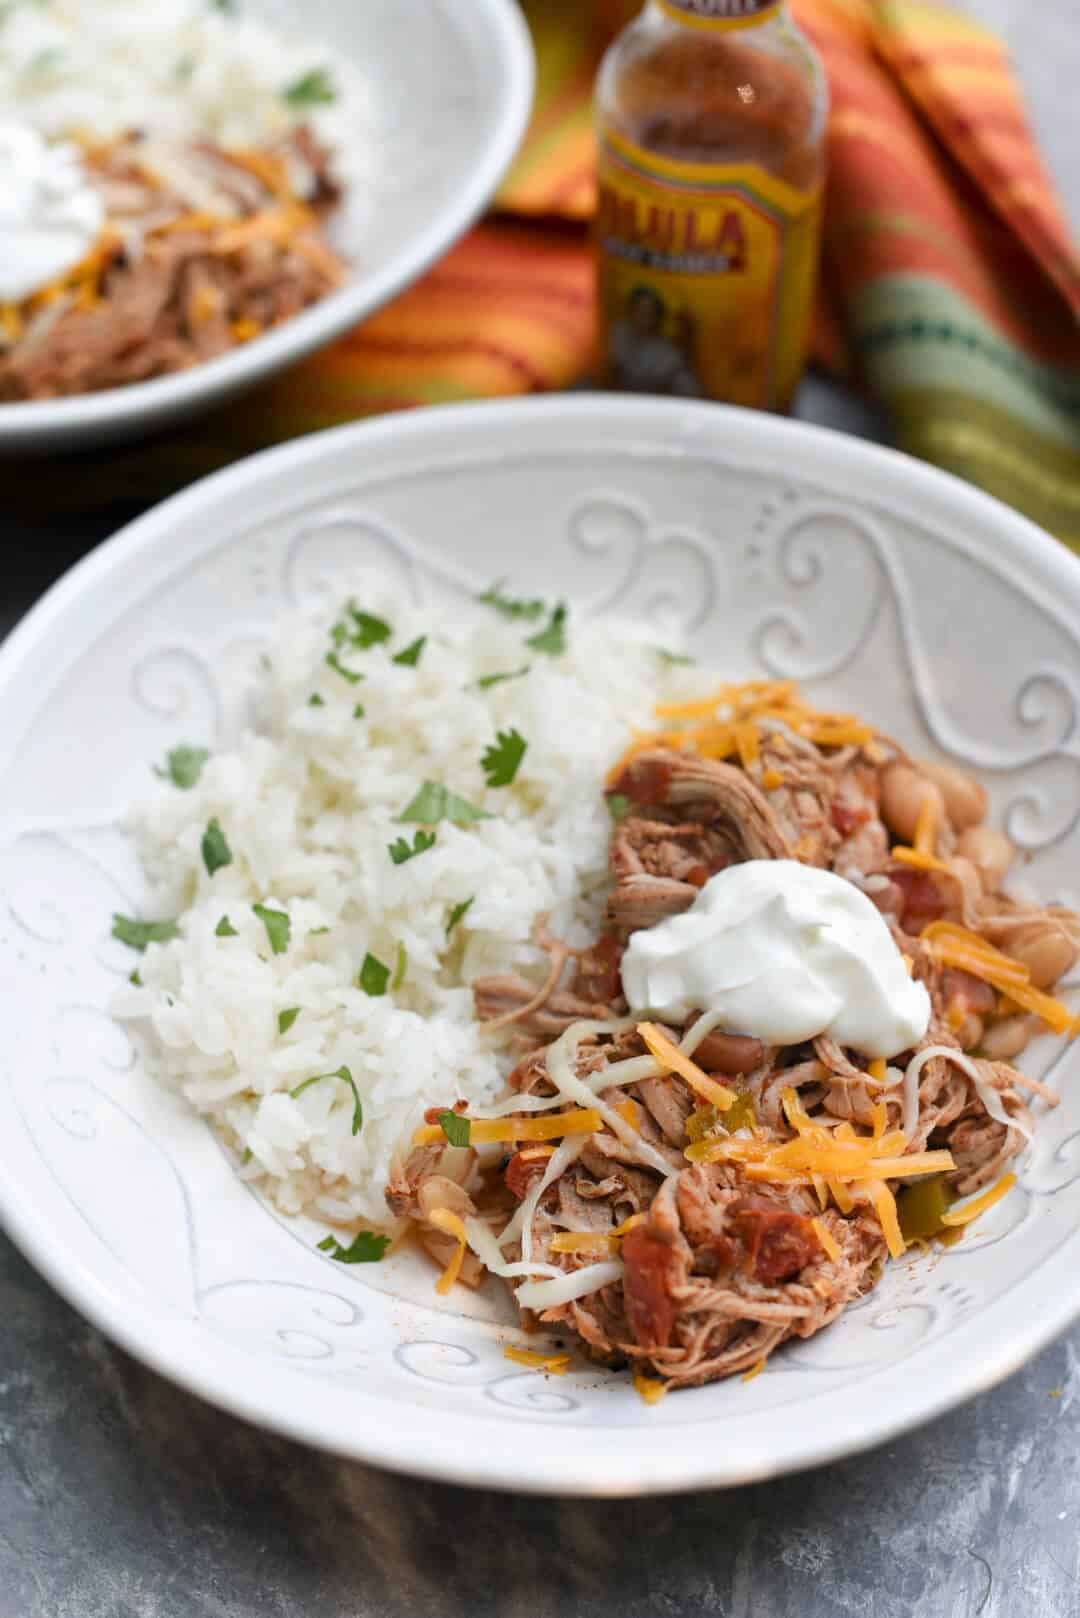 Shredded pork and beans topped with cheese and sour cream in a bowl with rice.